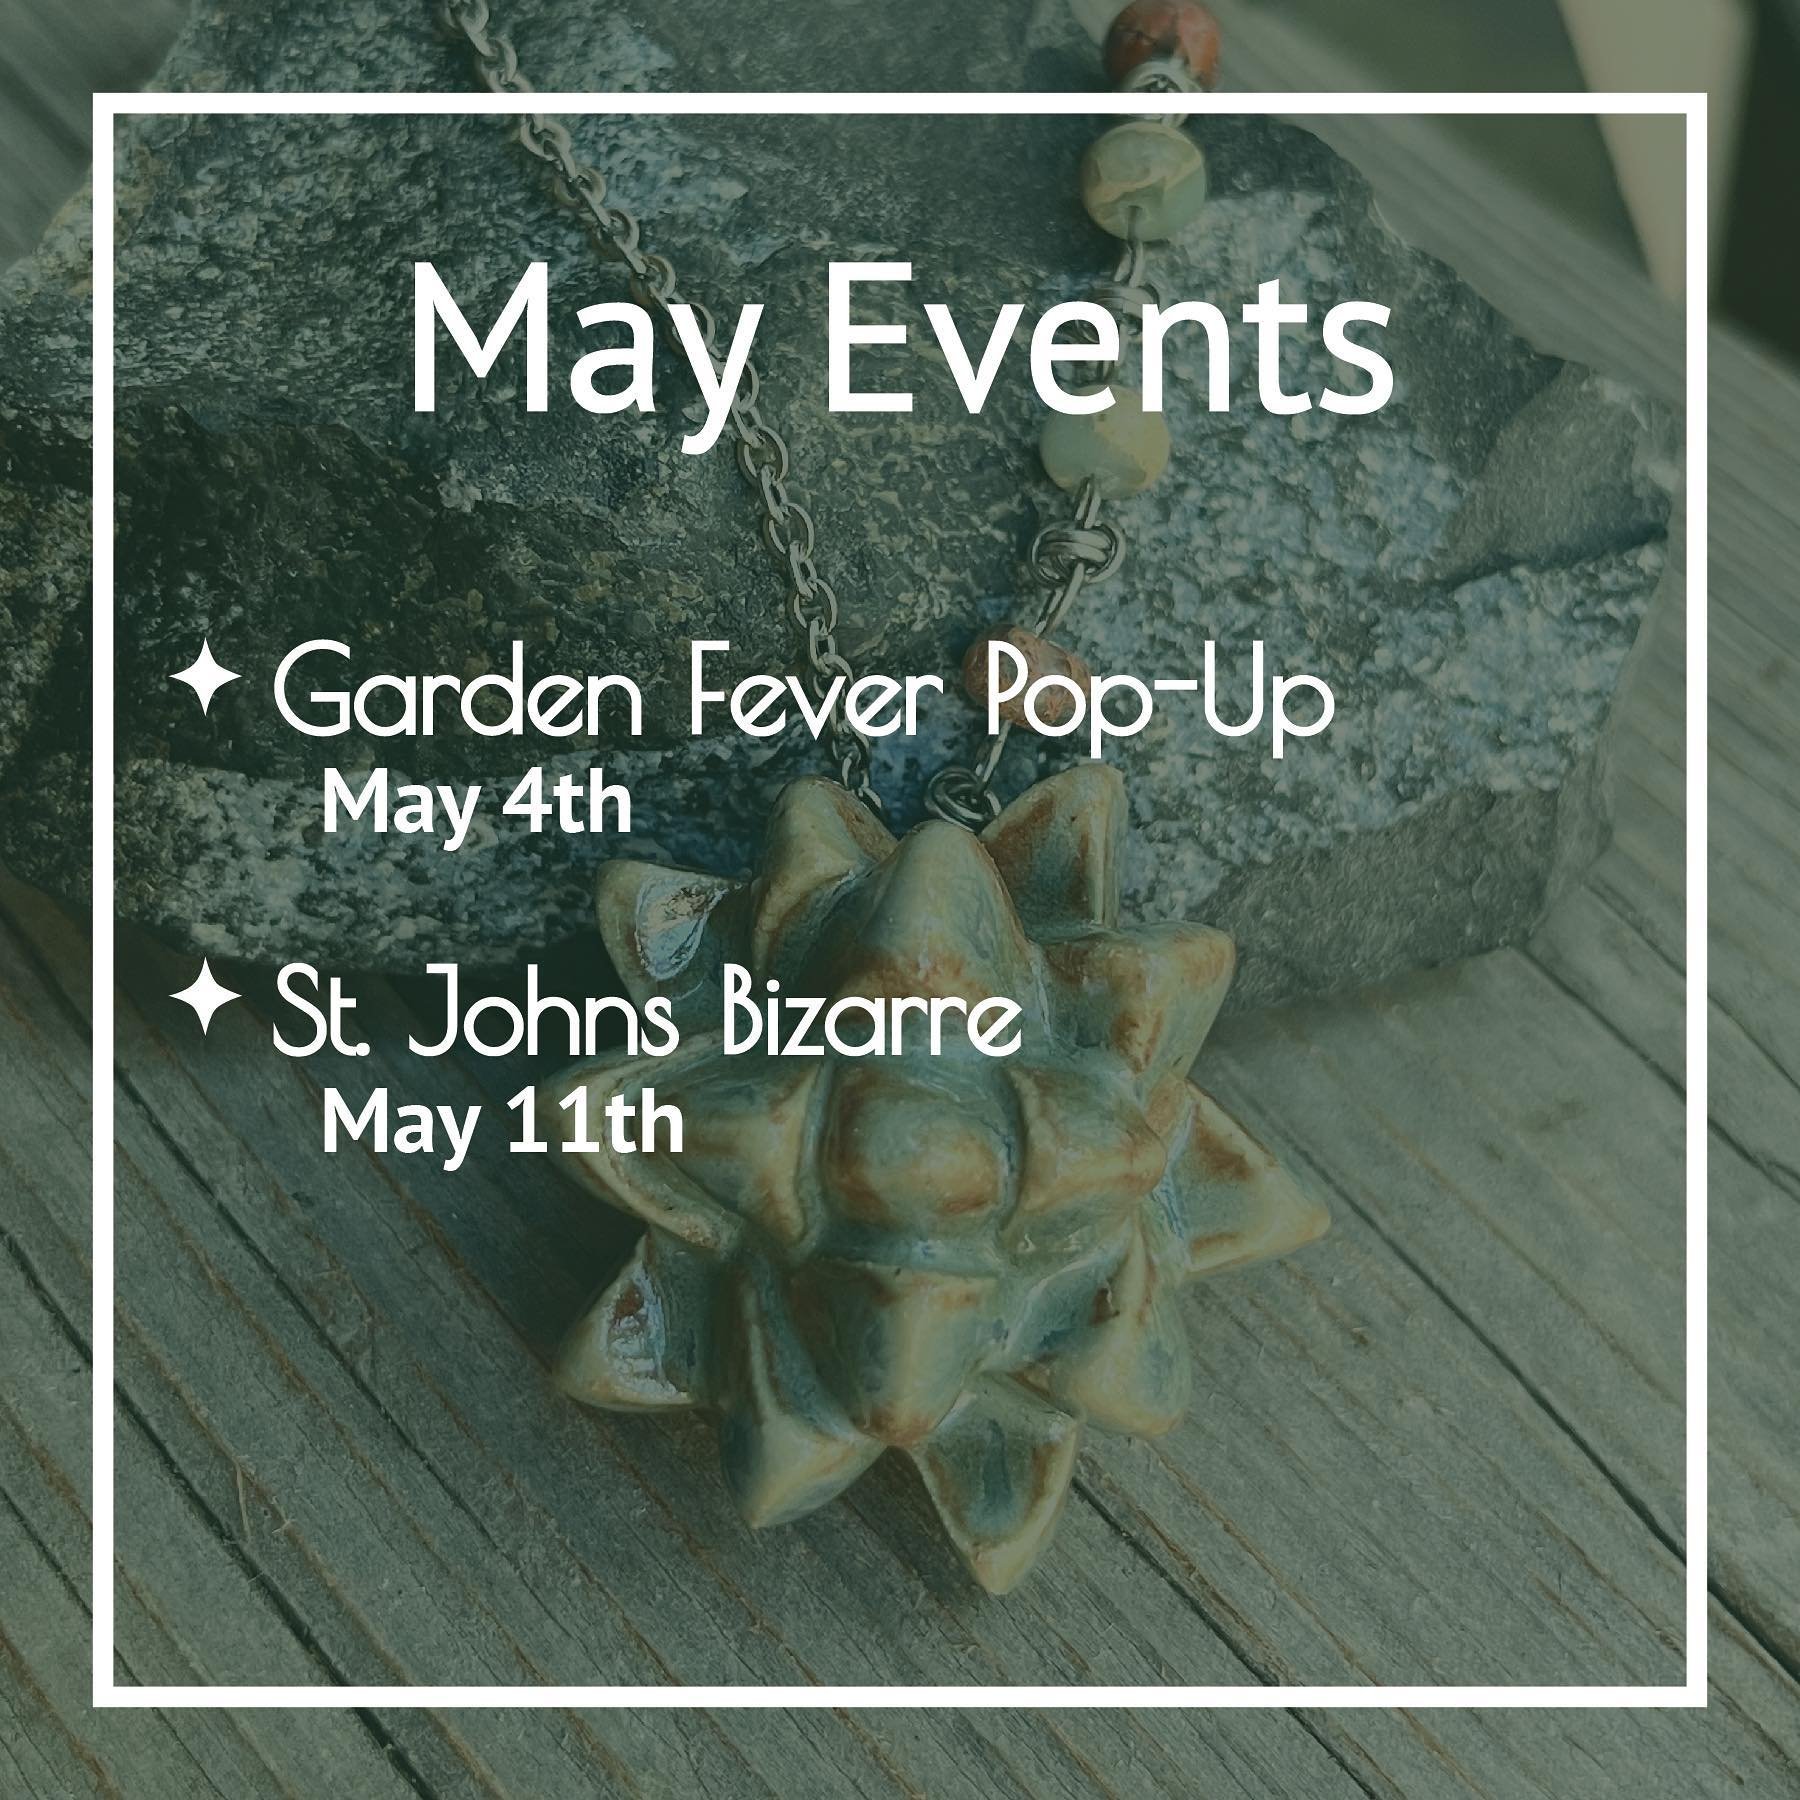 🌻Time to buy local garden supplies!🪴
&bull;
This week you can find me at Garden Fever on NE 24th Ave. With some awesome handmade garden accessories and home goods. I am also looking forward to returning to the St Johns Bizarre on May 11th. This eve